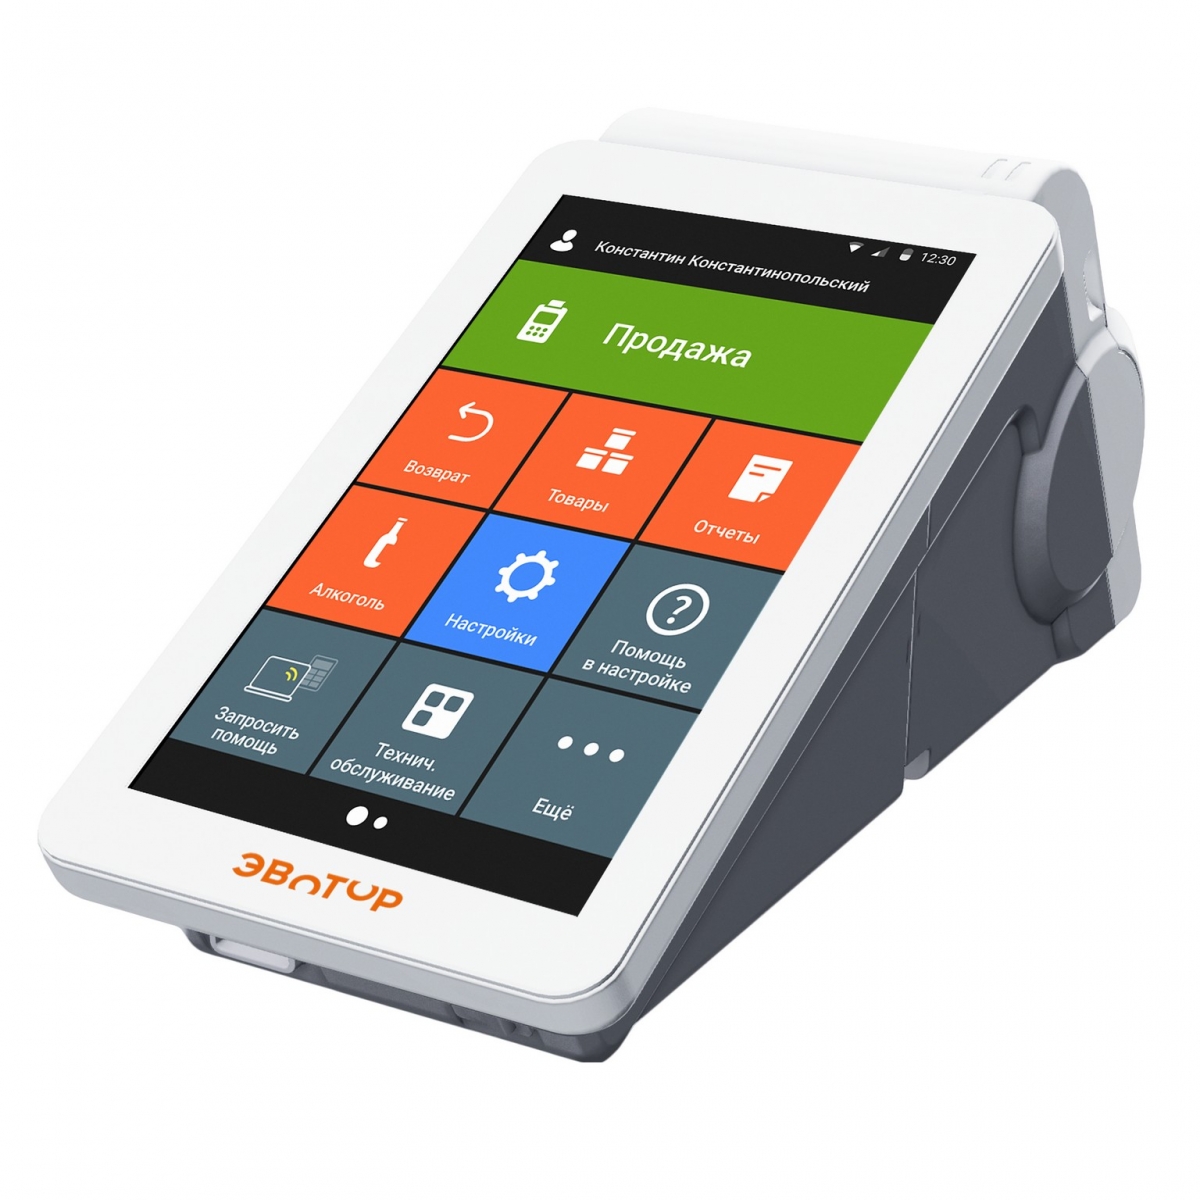 Evotor Smart Terminals Start Up for a New Audience